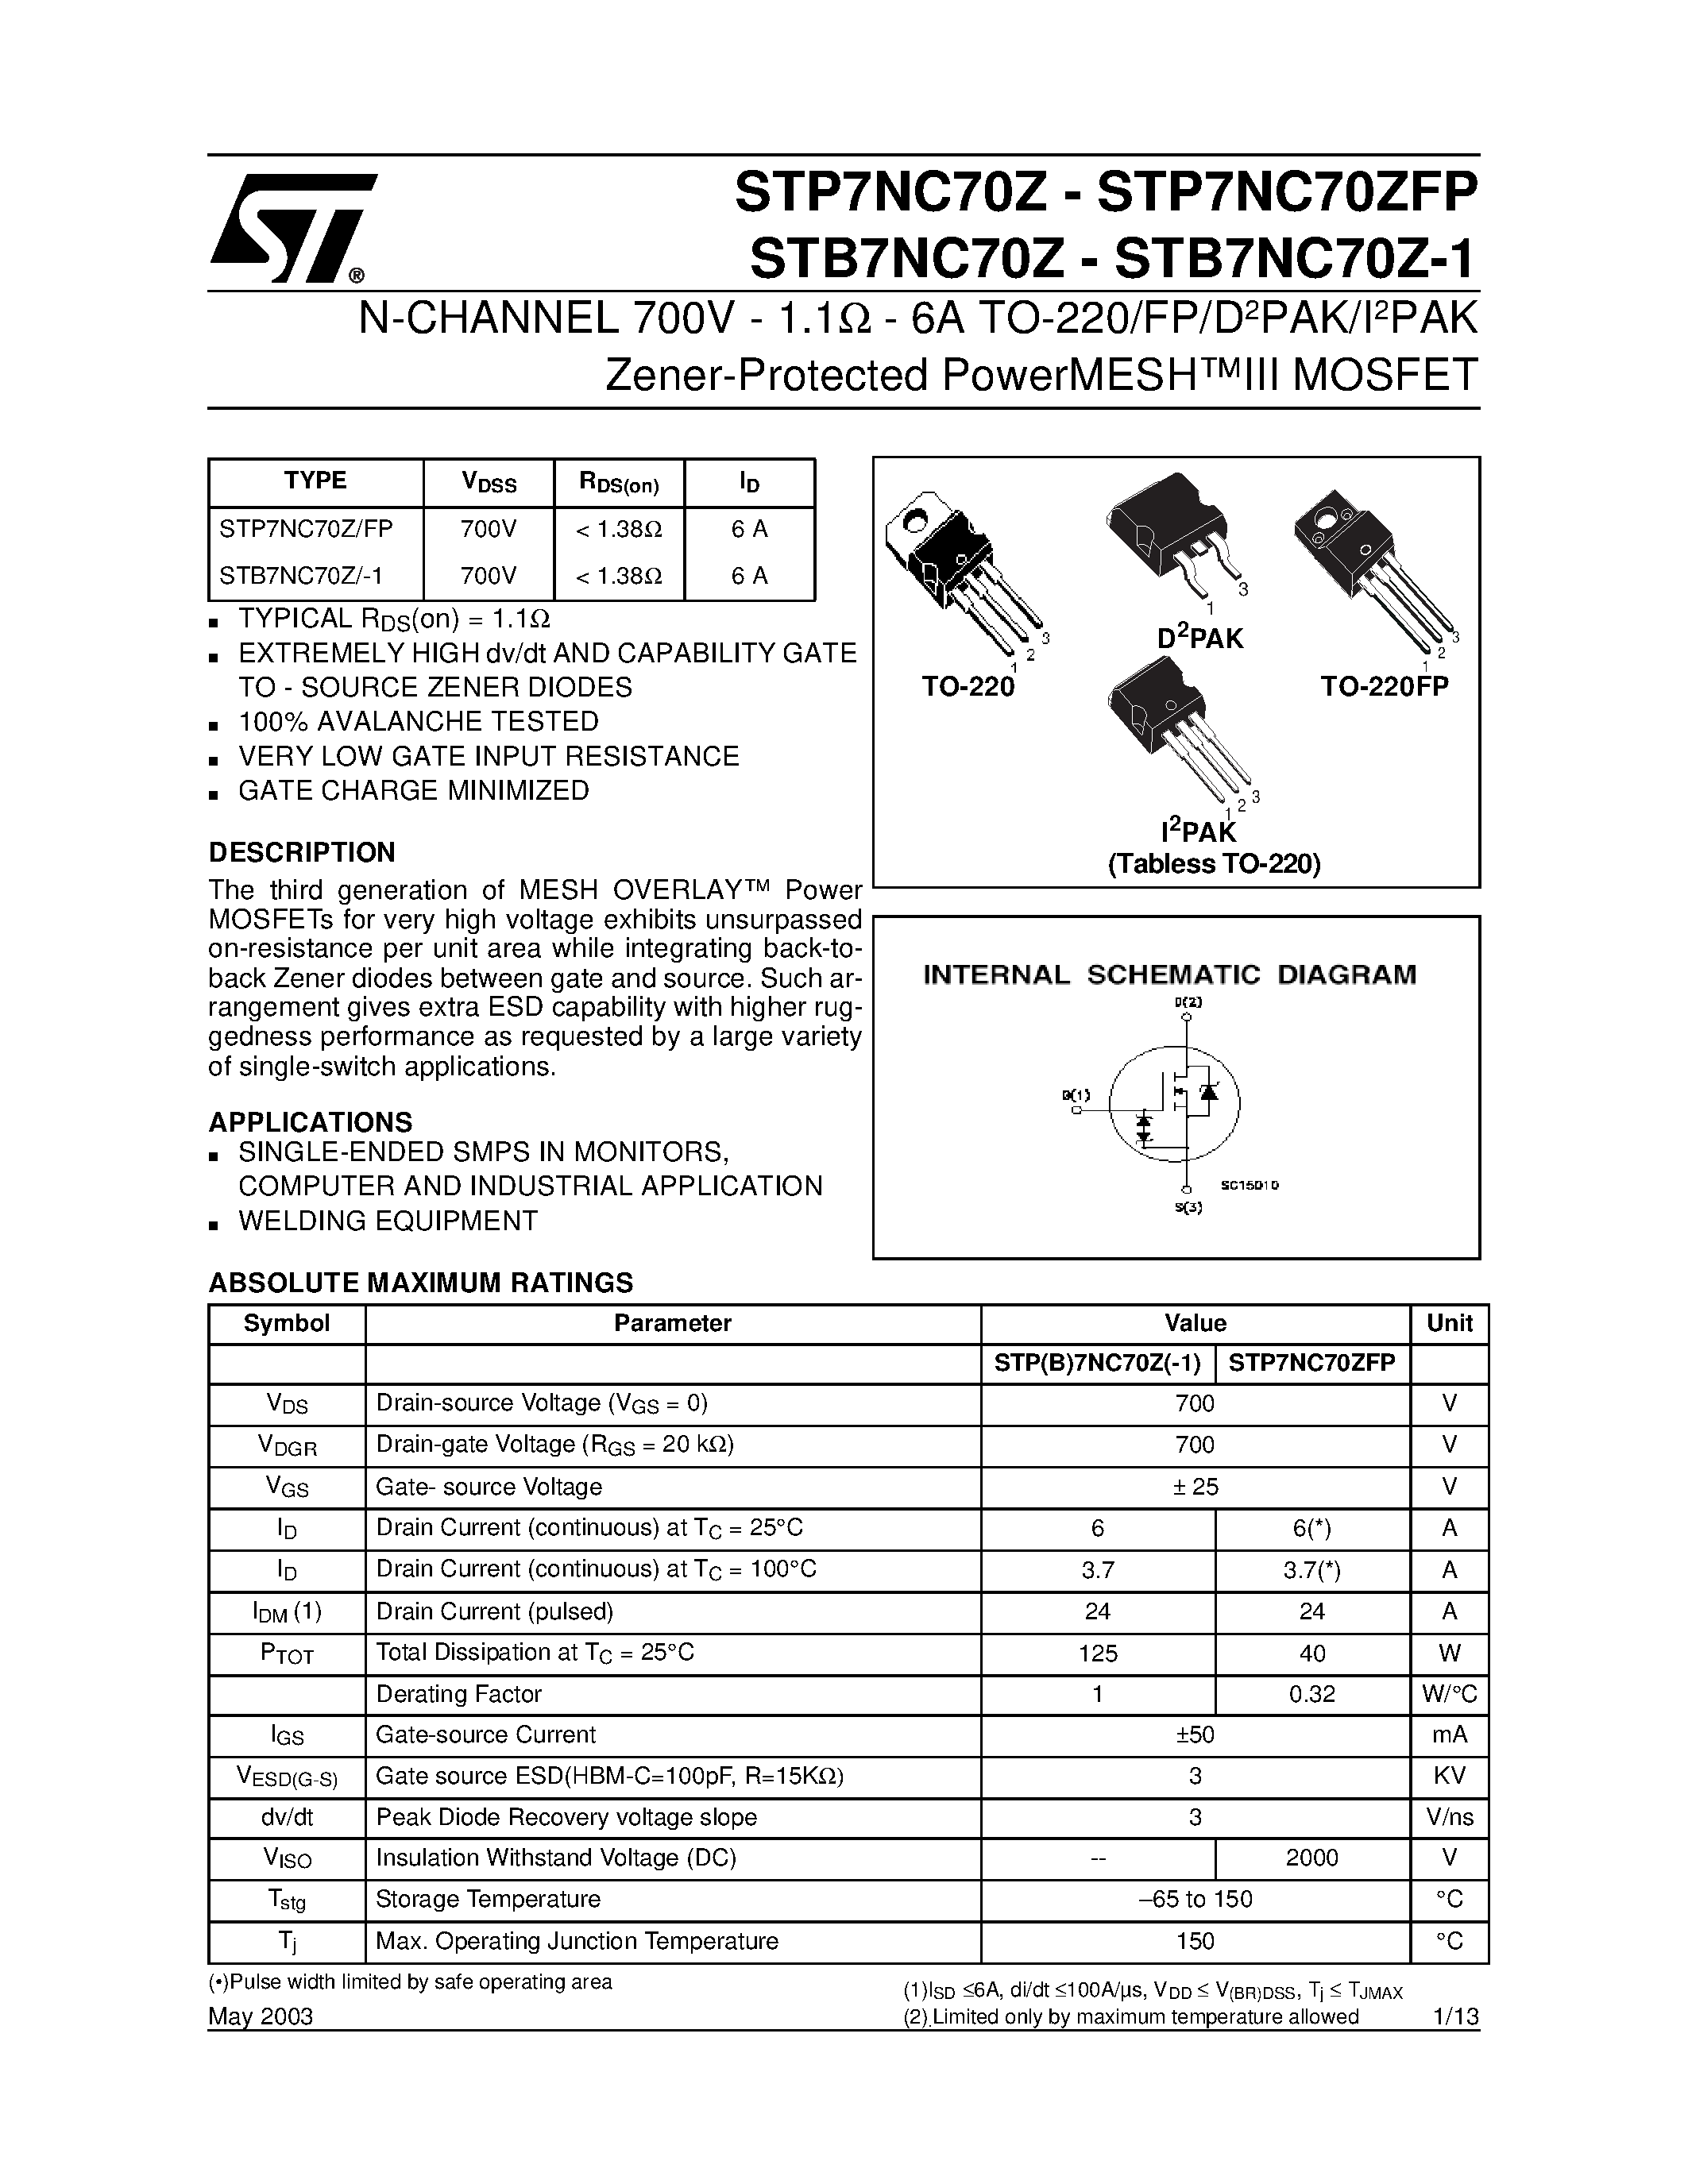 Datasheet STB7NC70Z - N-CHANNEL MOSFET page 1